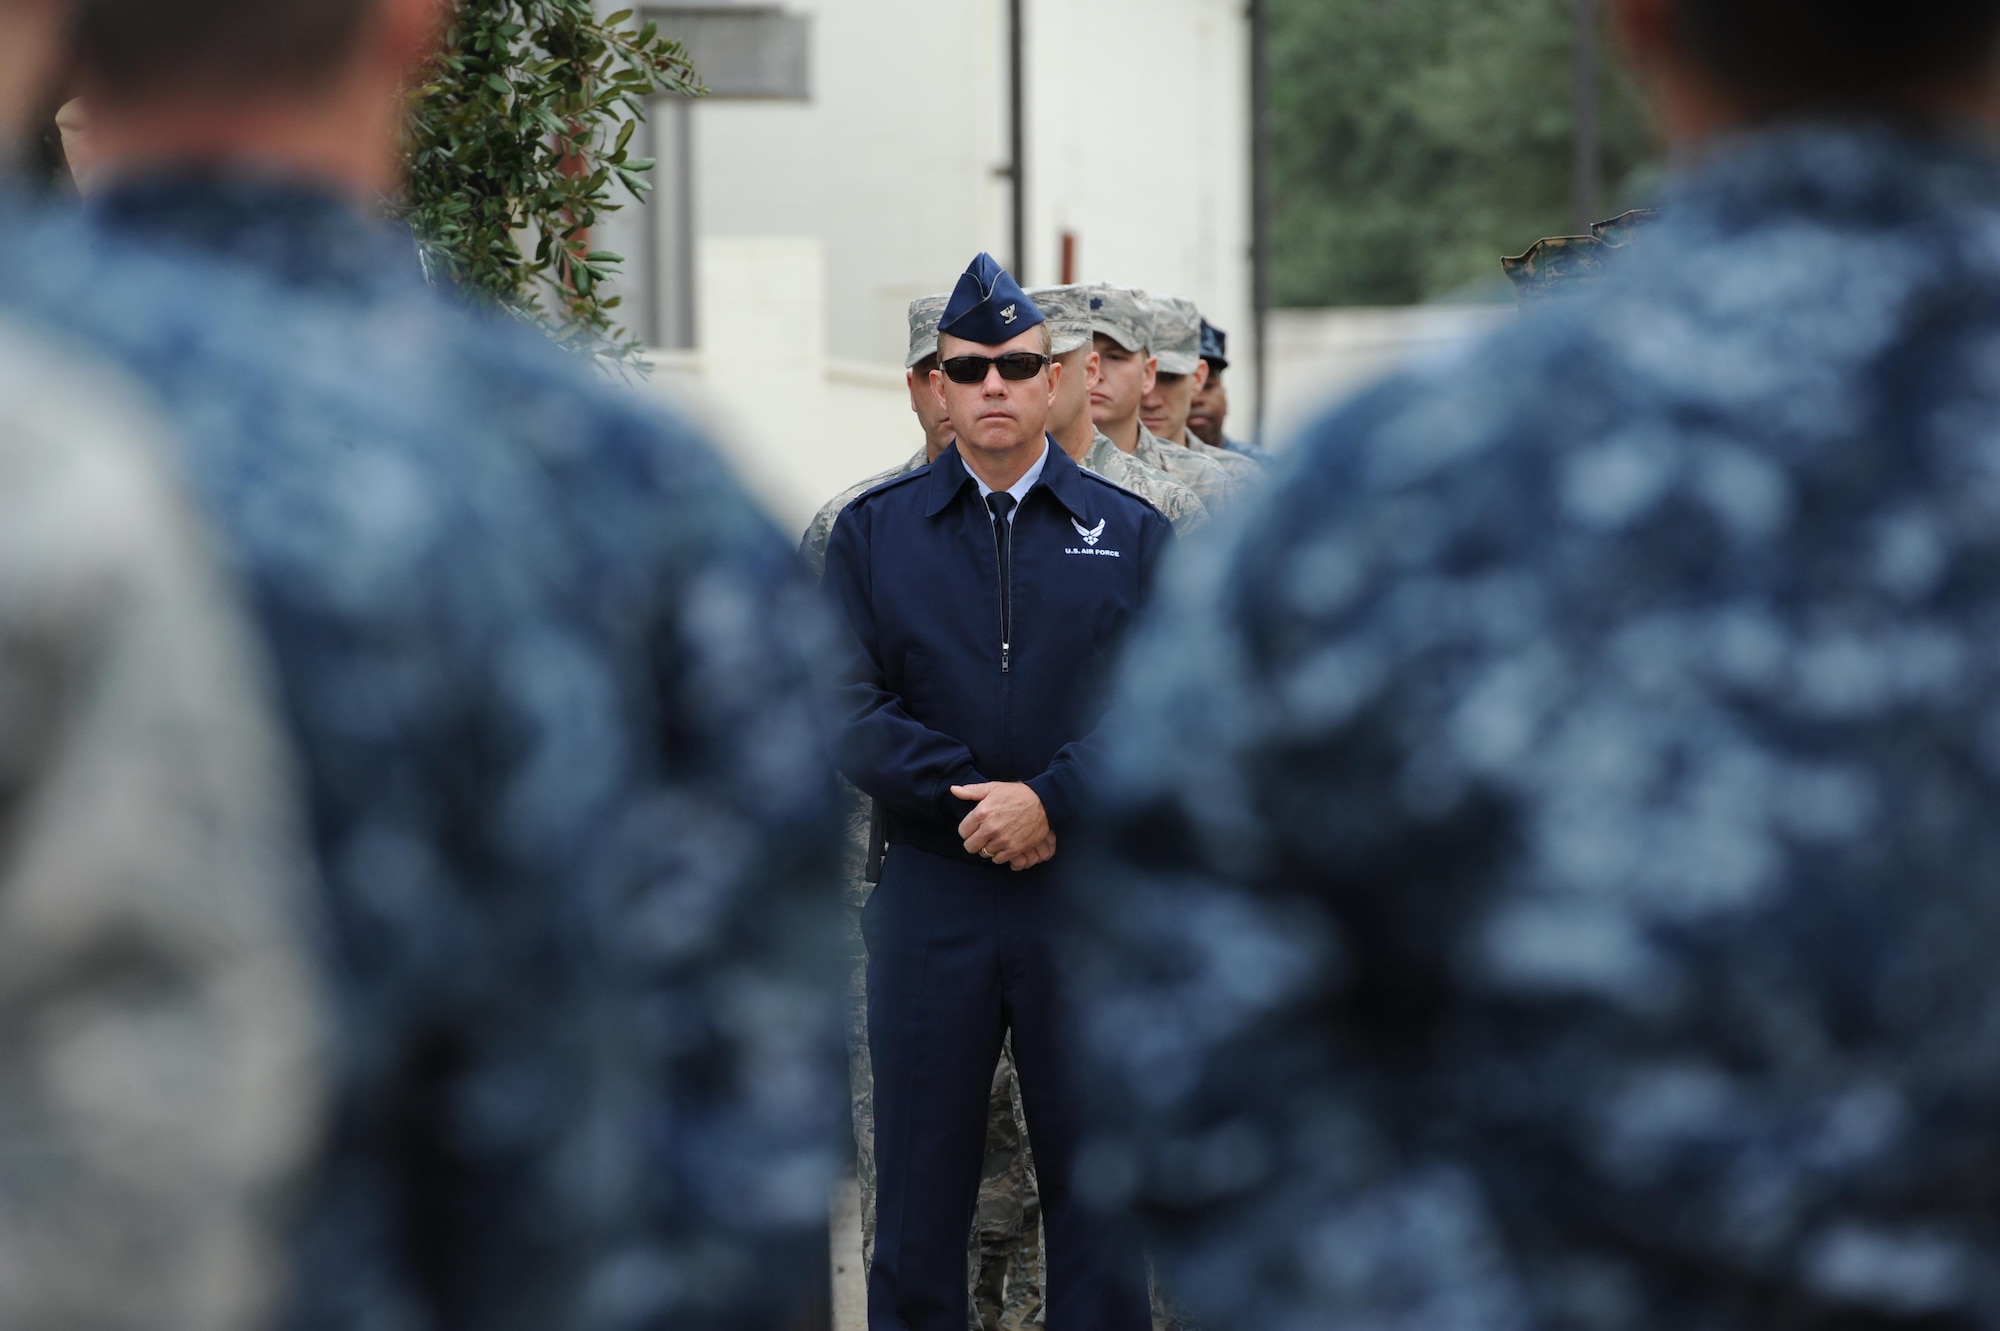 U.S. Air Force Col. Scott Solomon, 81st Training Group commander, attends a Center for Naval Aviation Technical Training Unit Keesler Pearl Harbor 75th Anniversary Remembrance Ceremony in front of Allee Hall Dec. 7, 2016, on Keesler Air Force Base, Miss. More than 100 Keesler personnel attended the event to honor those lost in the Dec. 7, 1941 Pearl Harbor attacks. (U.S. Air Force photo by Kemberly Groue)